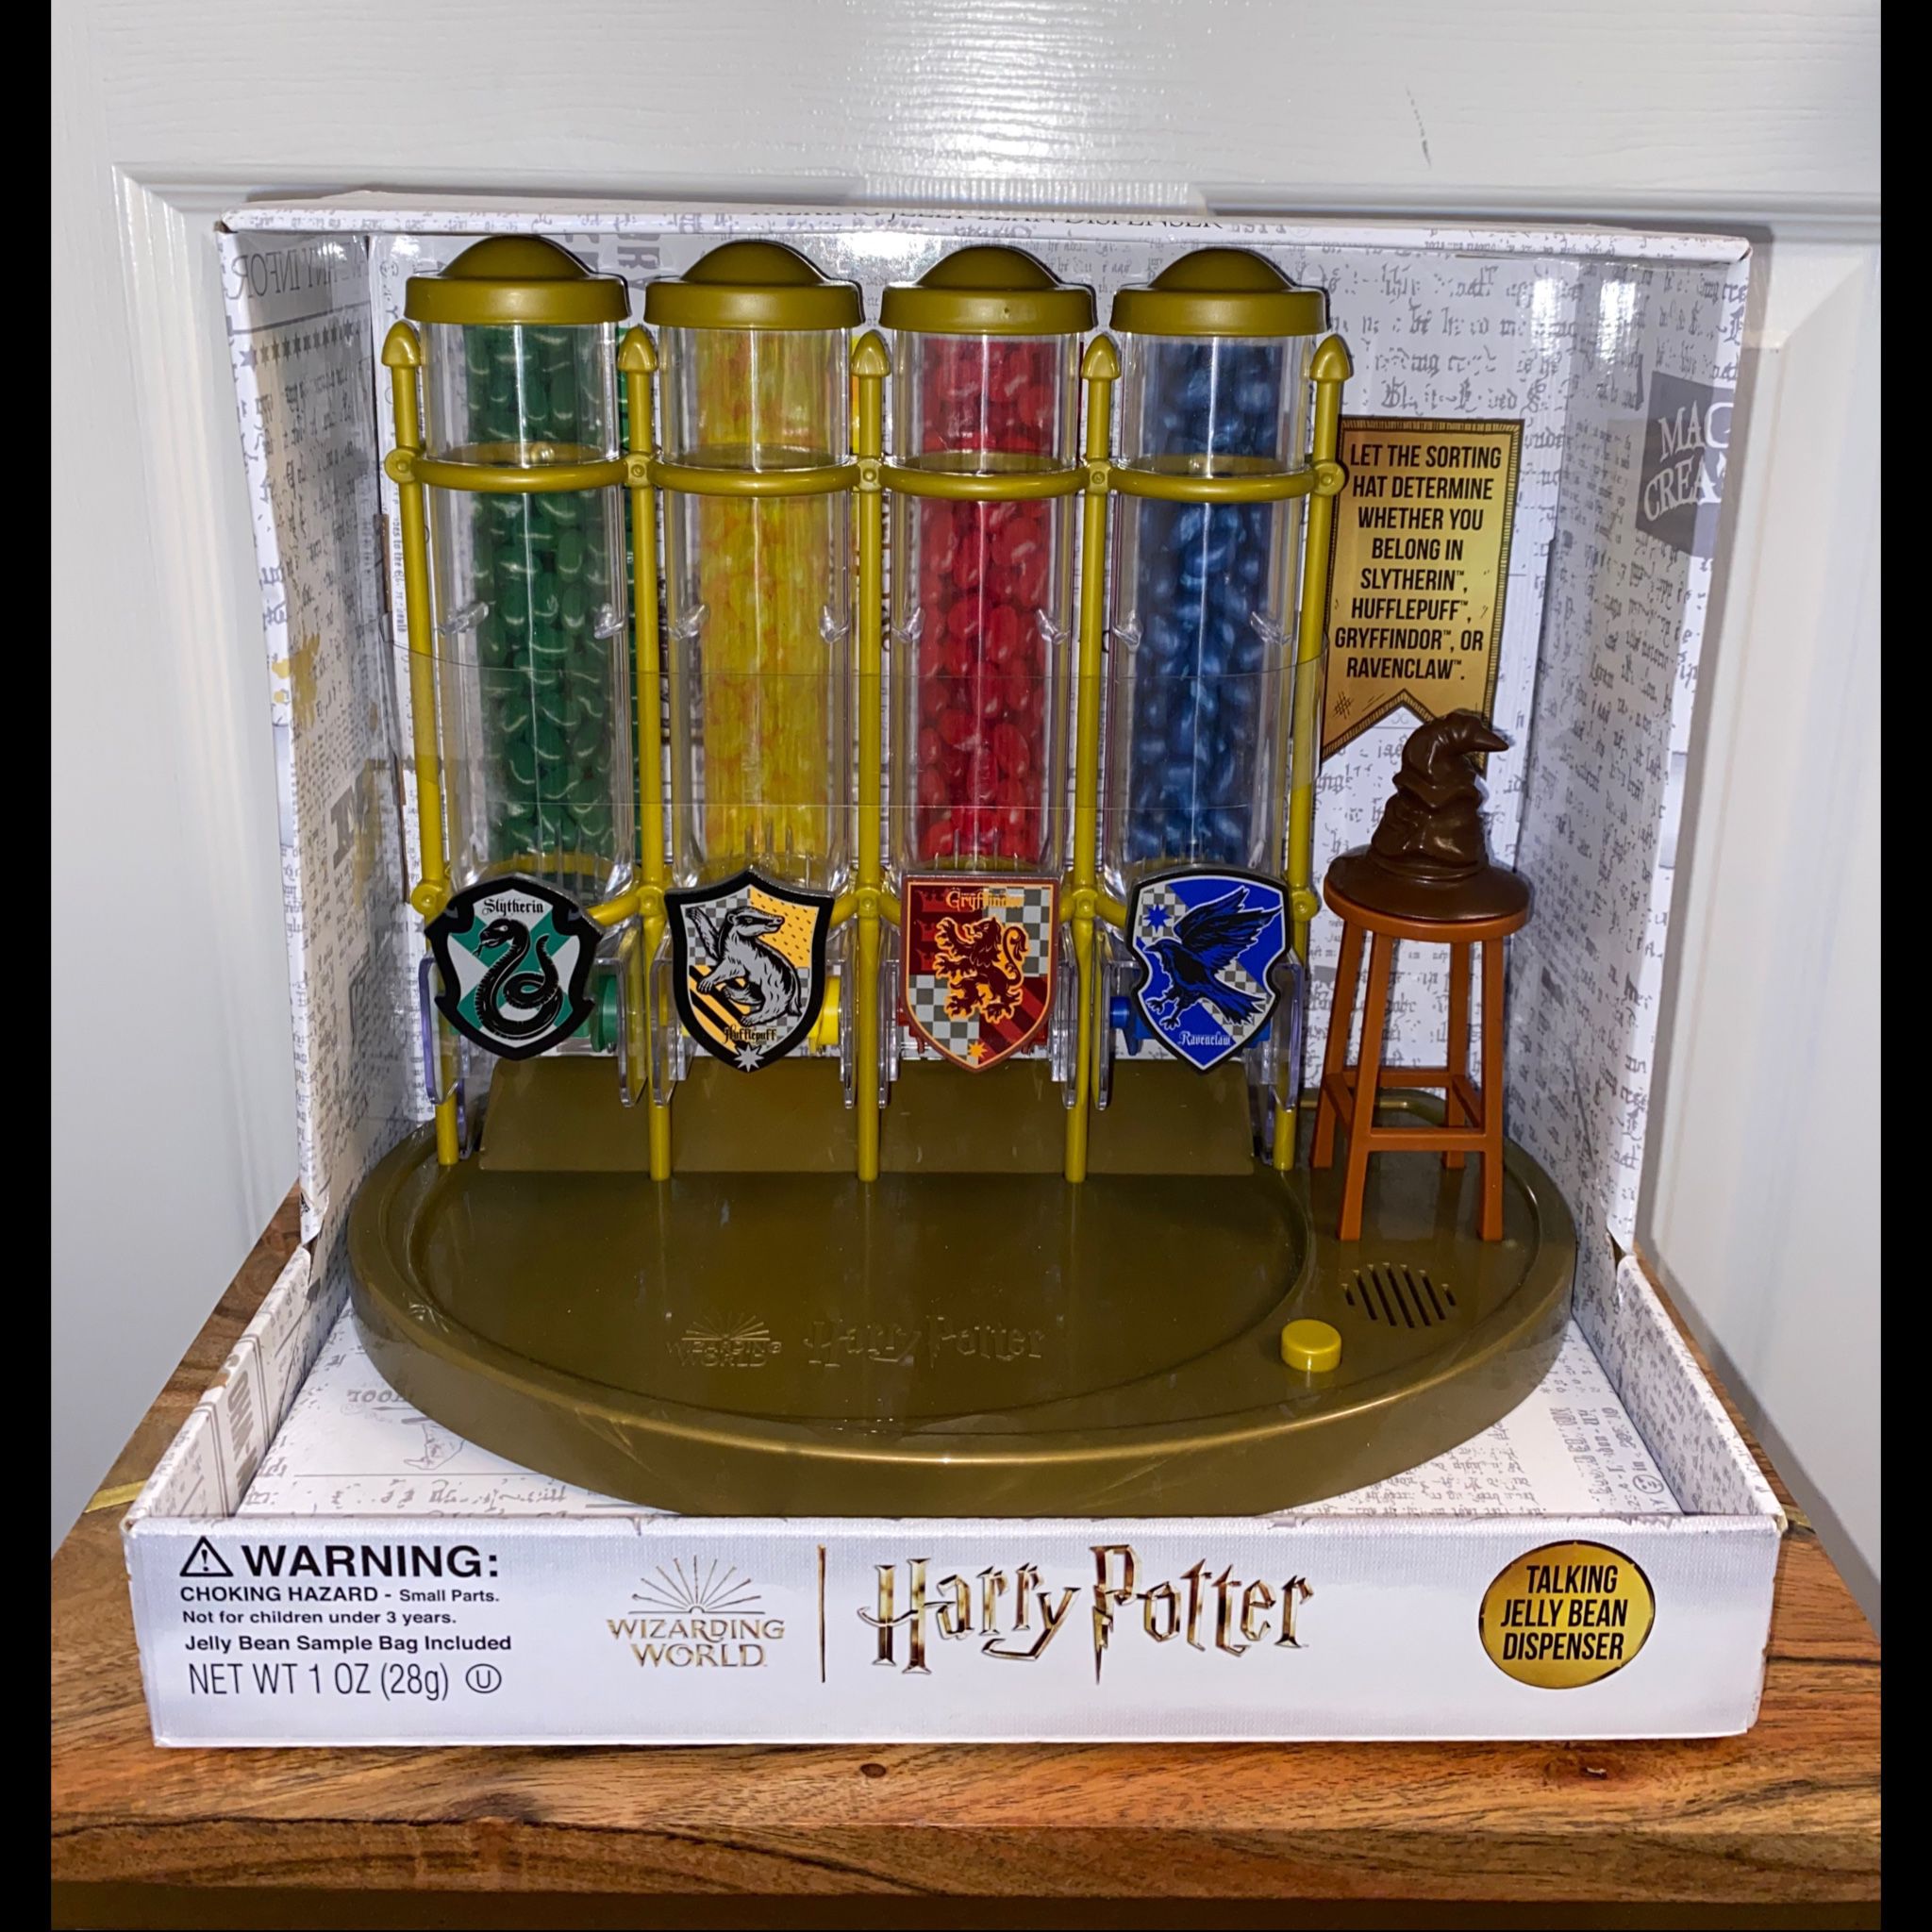 Harry Potter Jelly Belly House Points Counter TALKING JELLY BEAN  Dispenser 